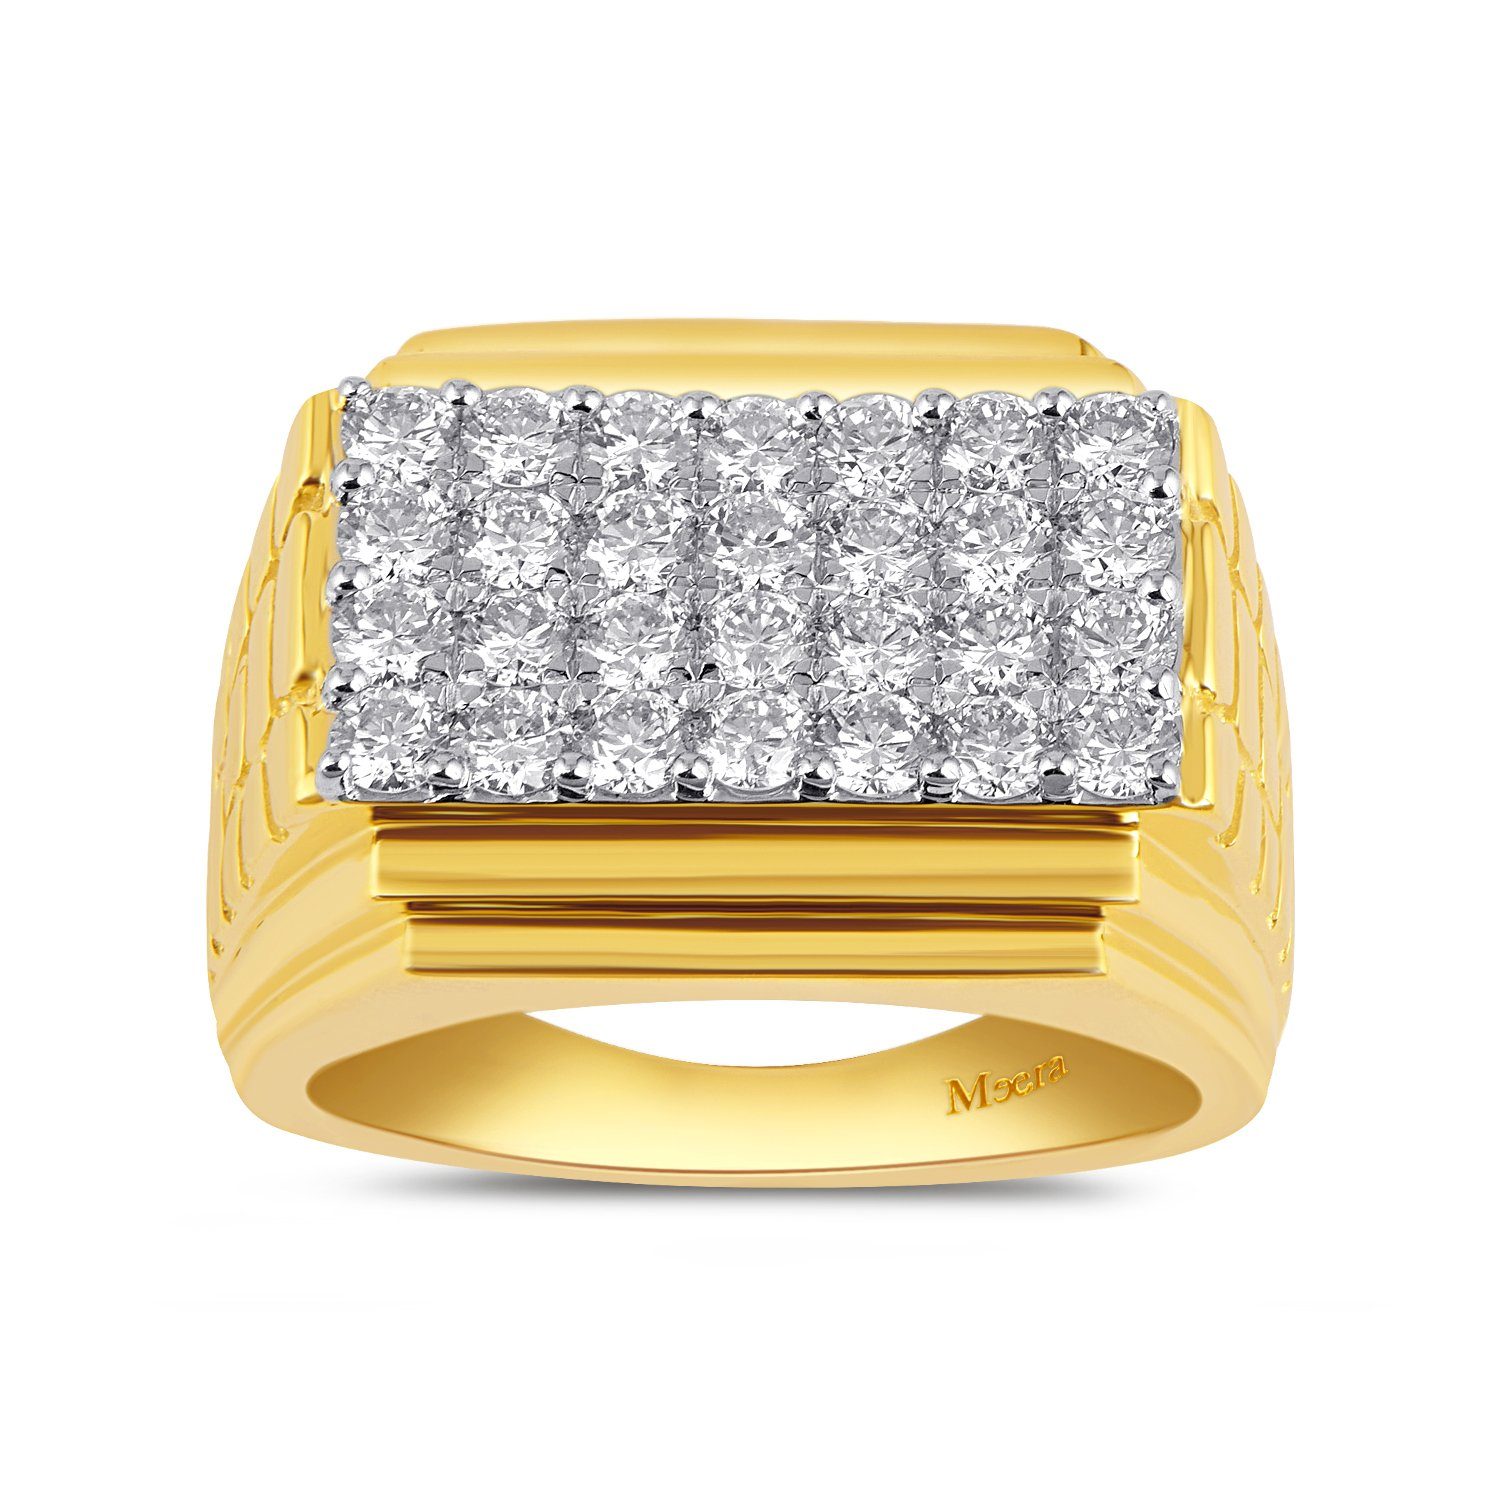 Meera Men's Ring with 2.00ct of Laboratory Grown Diamonds in 9ct Yellow Gold Rings Bevilles 